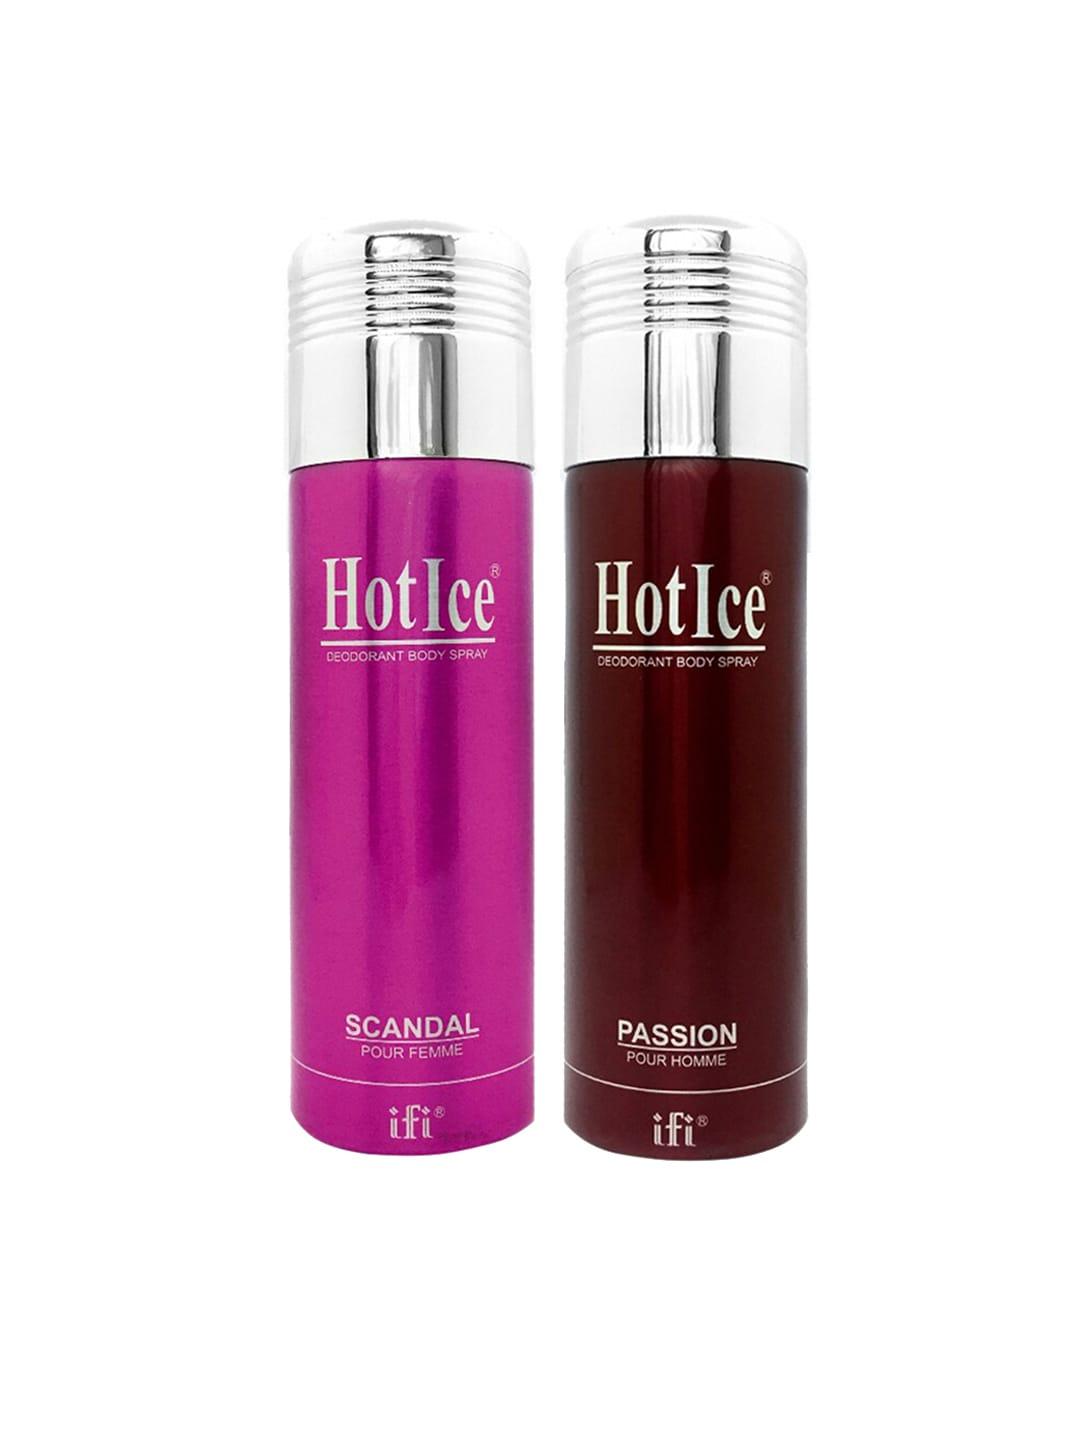 Hot Ice Scandal Fomme & Passion Homme Deodorant - 200ml Each